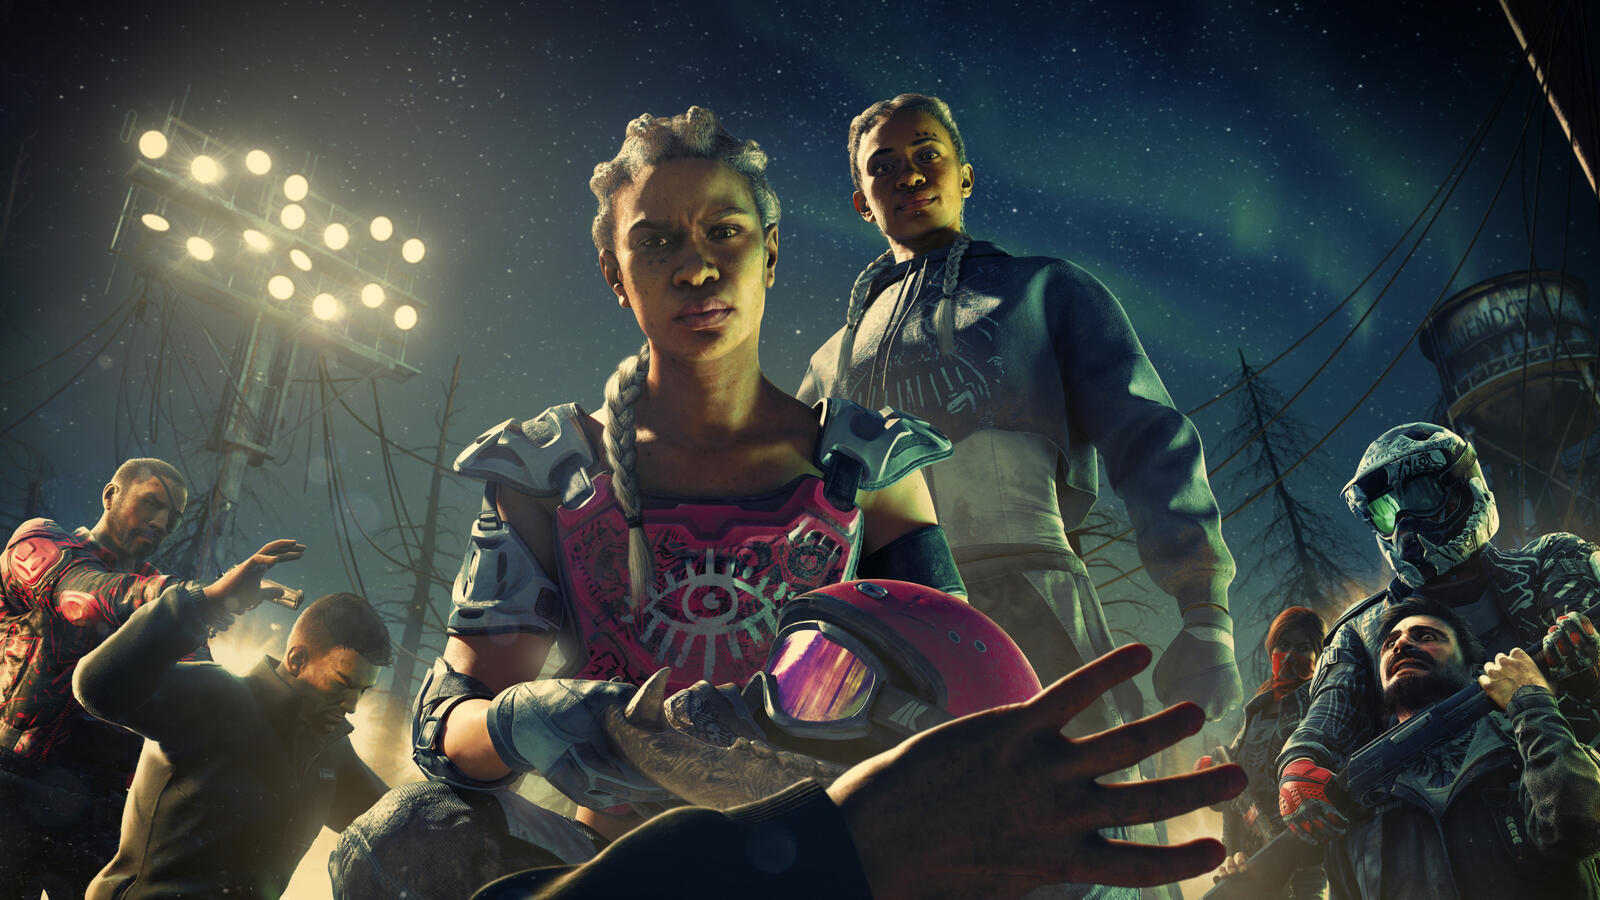 Wallpapers games wallpaper far cry new dawn night on the desktop